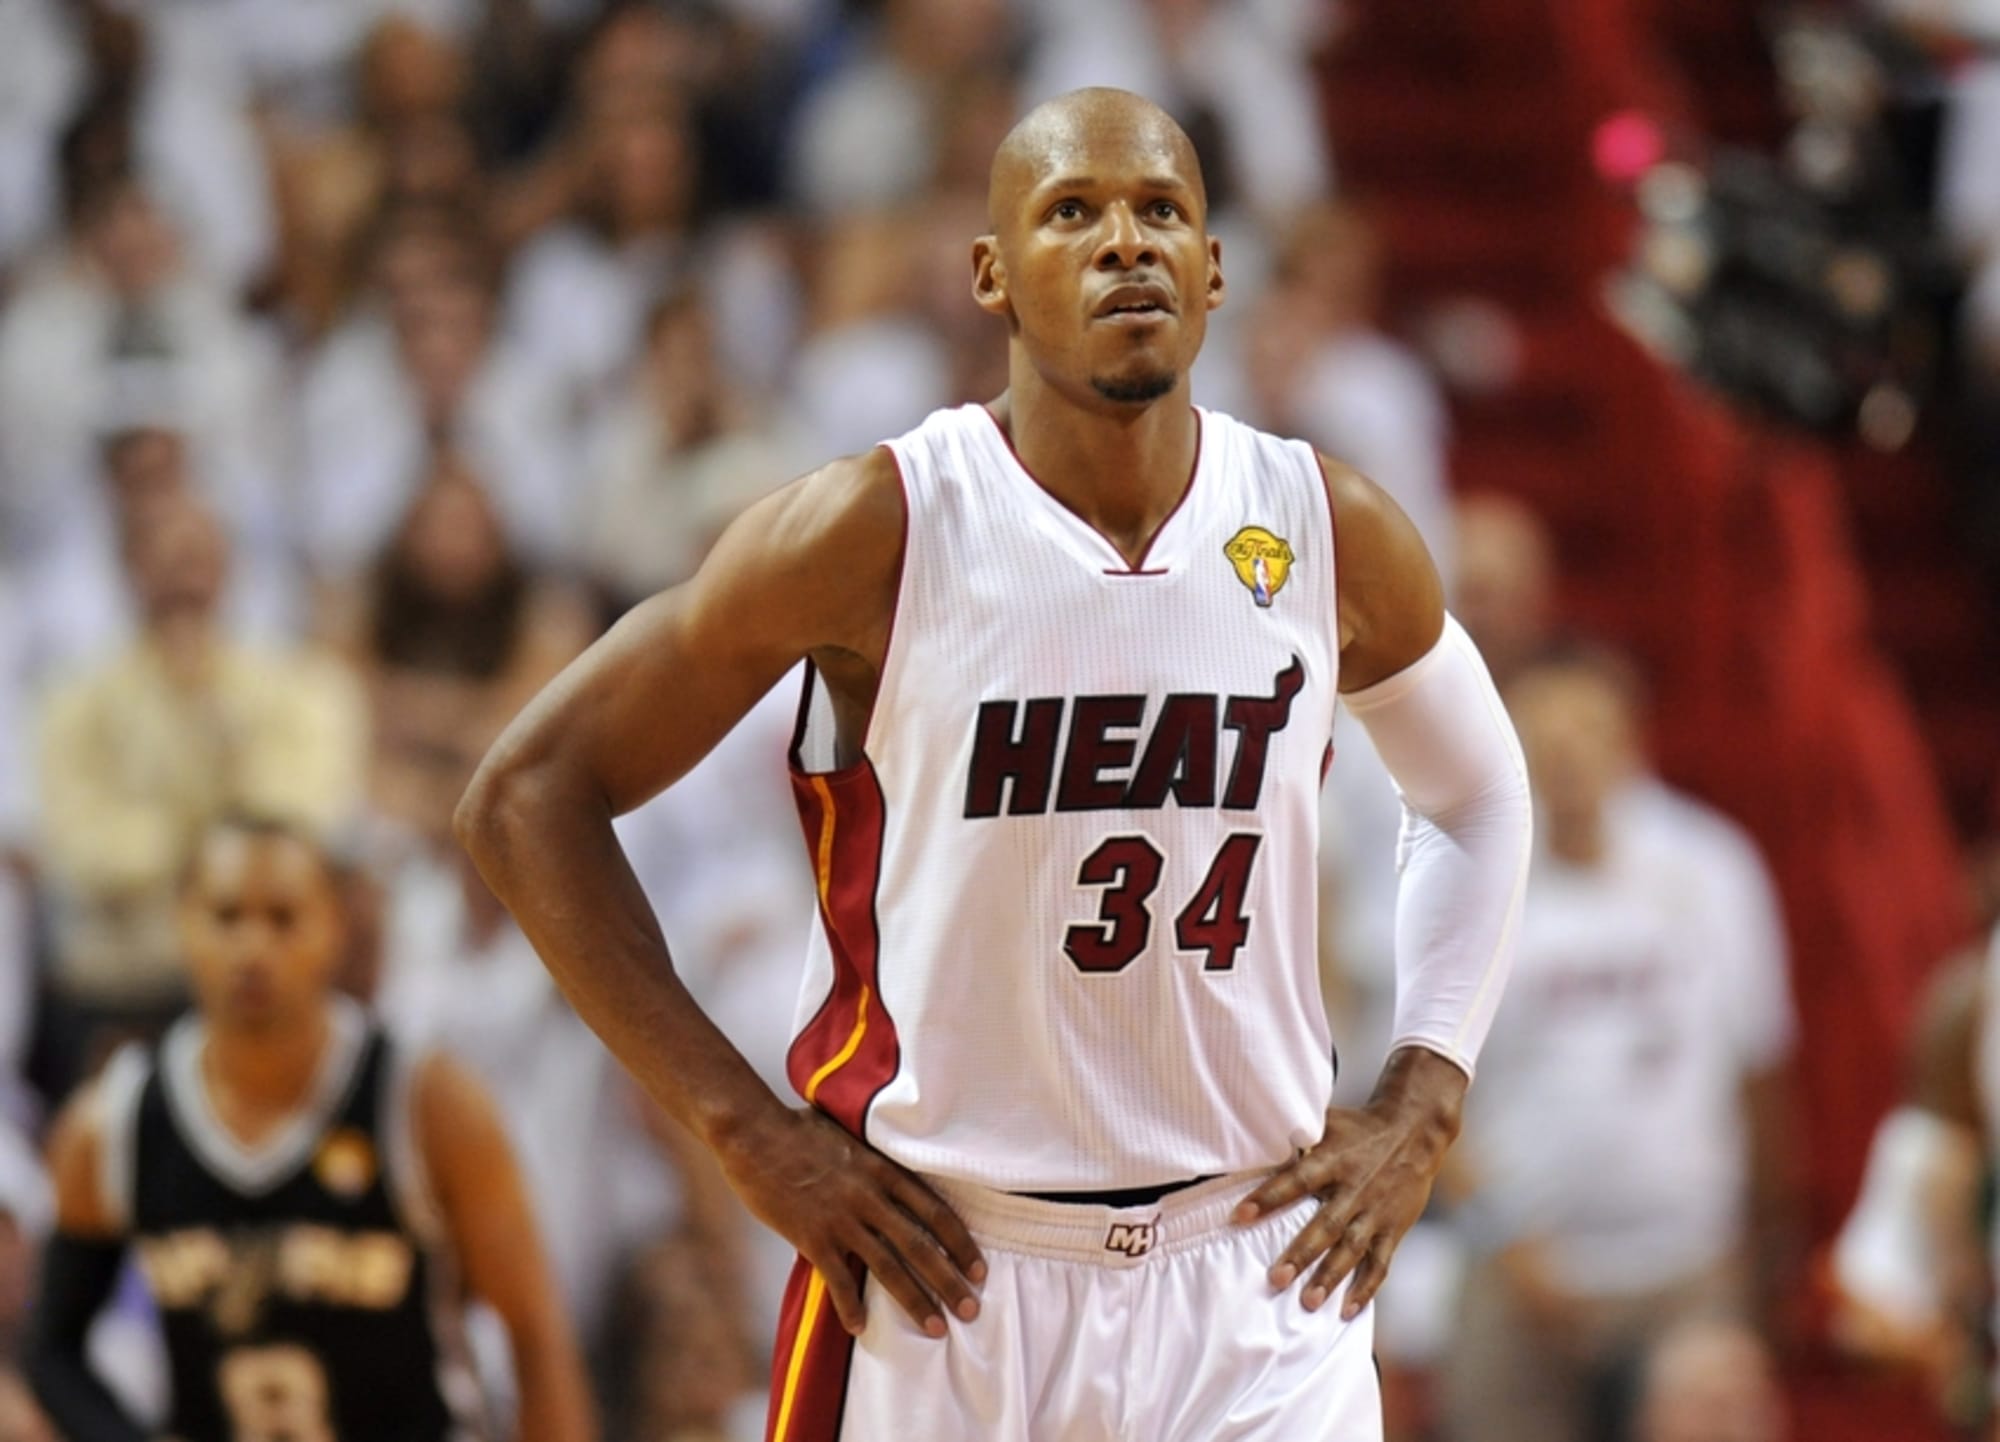 JanBasketball Blog: Ray Allen going to play in Miami Heat's jersey